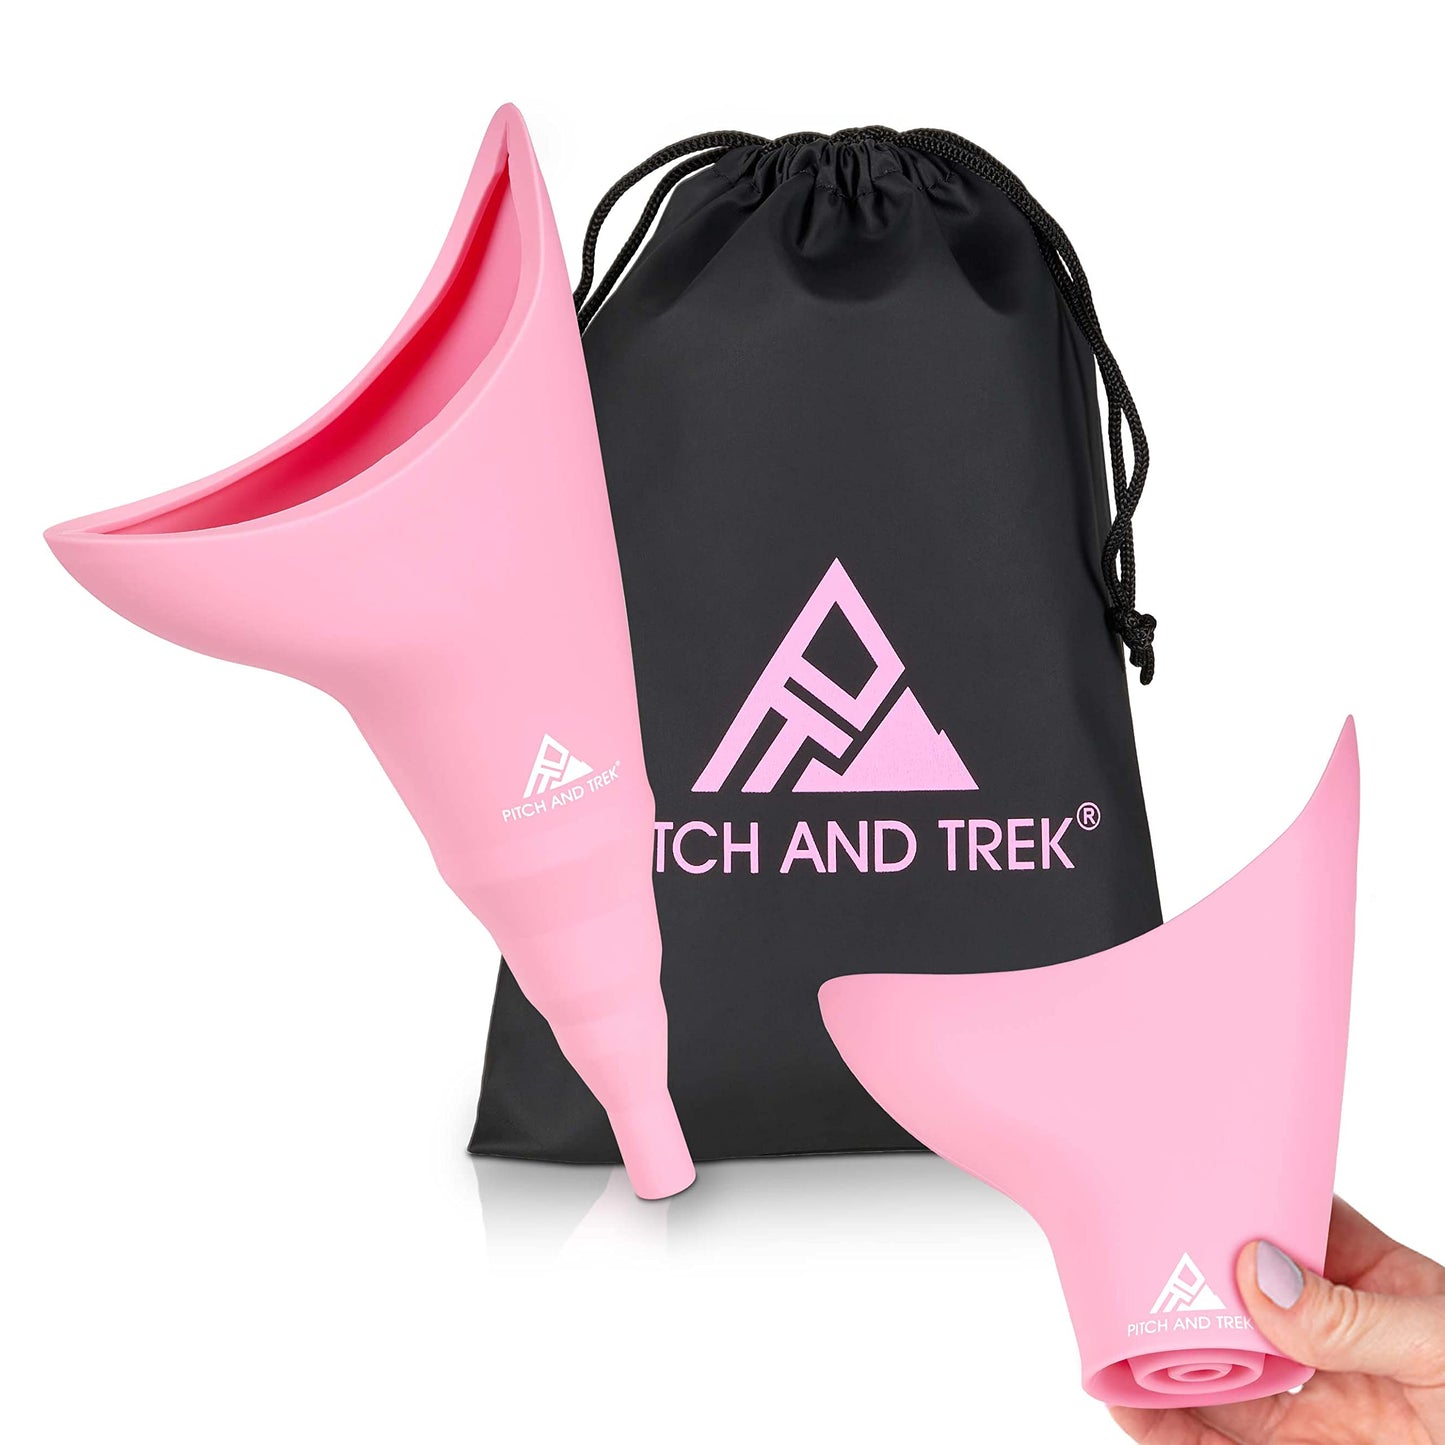 Pitch and Trek Female Urination Device, Silicone Standing Pee Funnel w/Discreet Carry Bag, for Travel, Road Trip, Festival, Camping & Hiking Gear Essentials for Women, Pink